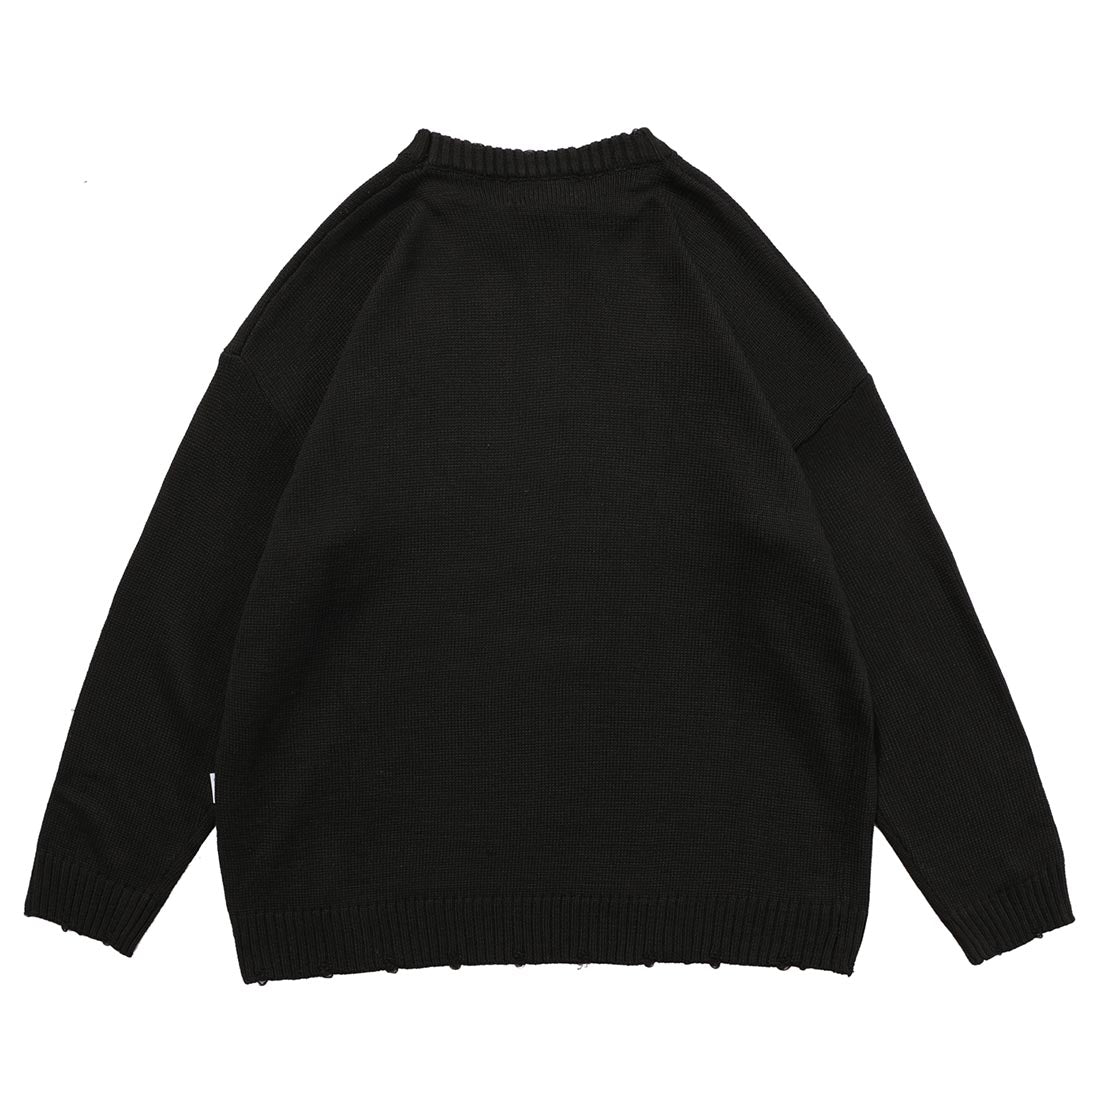 FANGS PRINTED KNITTED SWEATER